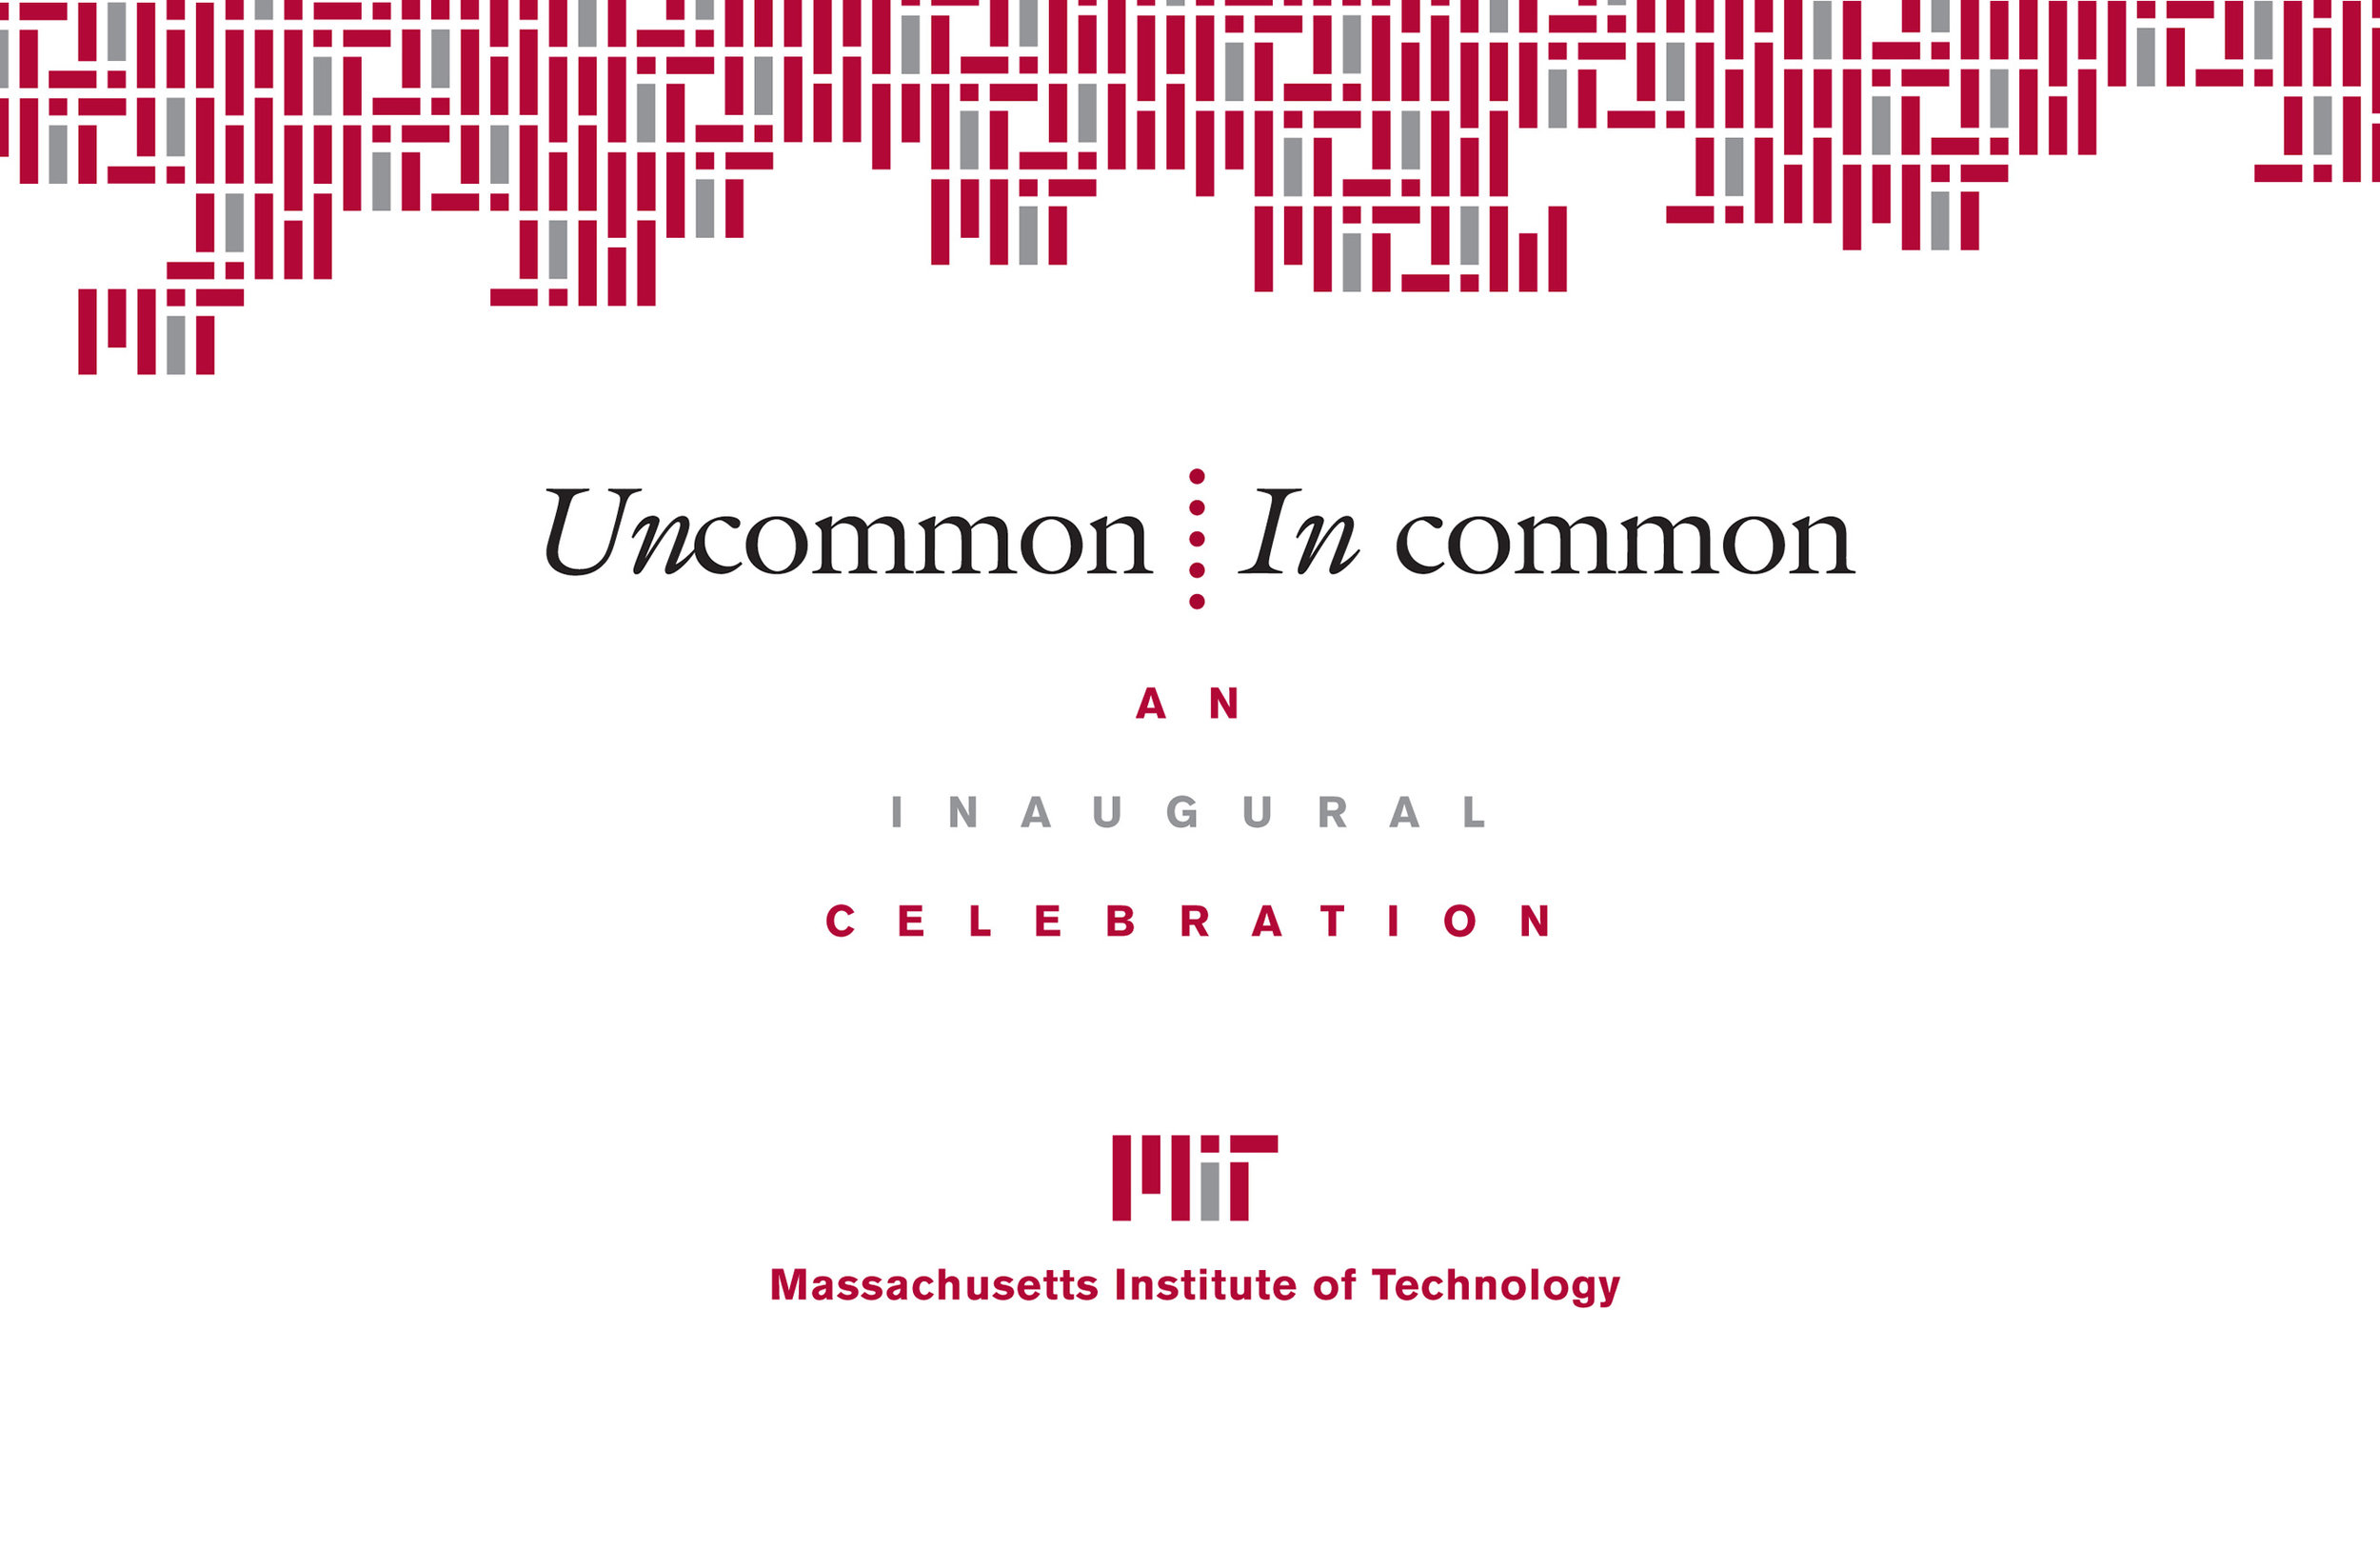 Invitation cover for MIT President Hockfield's inauguration